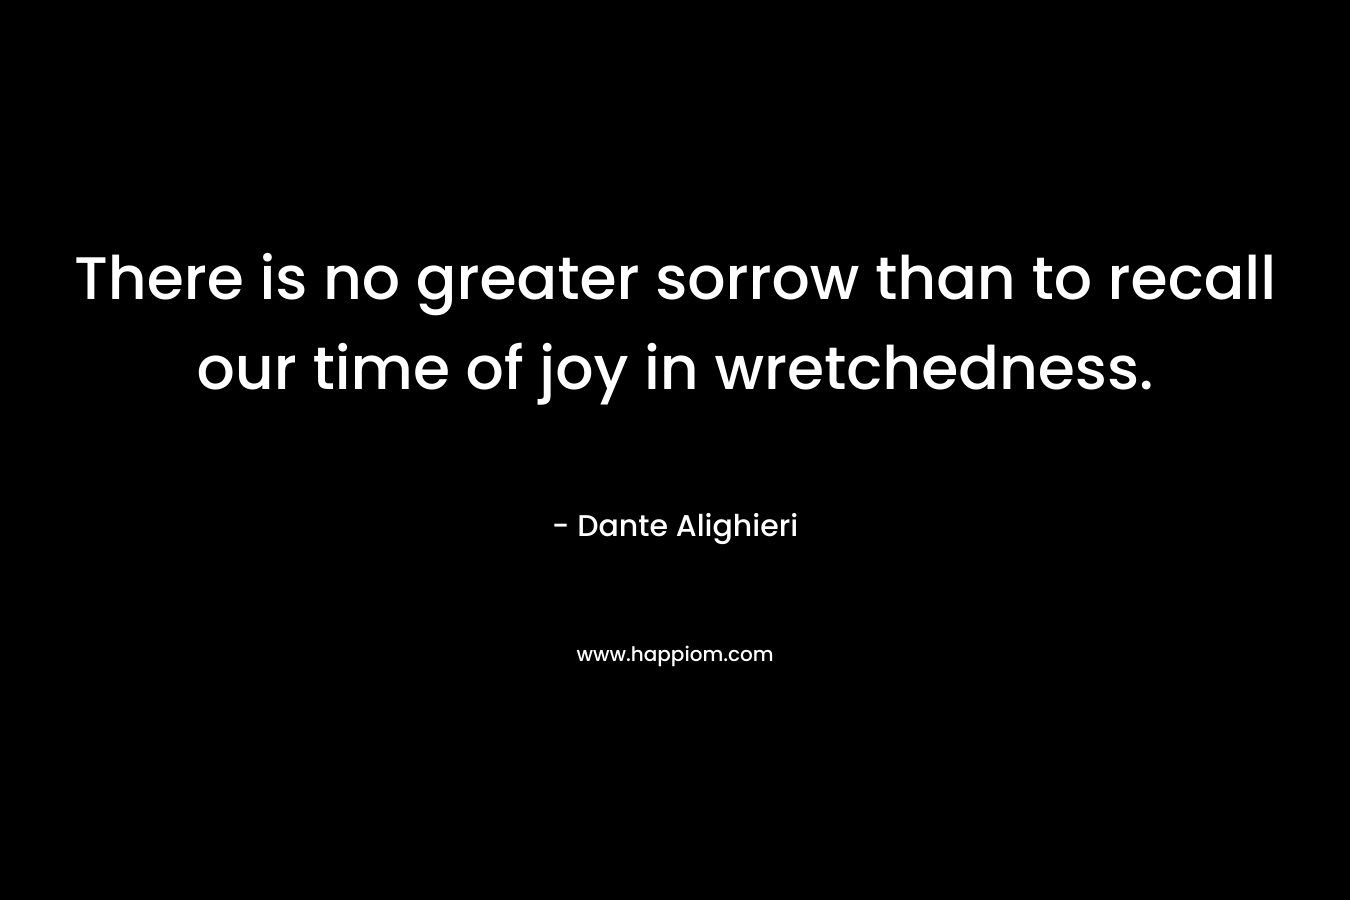 There is no greater sorrow than to recall our time of joy in wretchedness. – Dante Alighieri